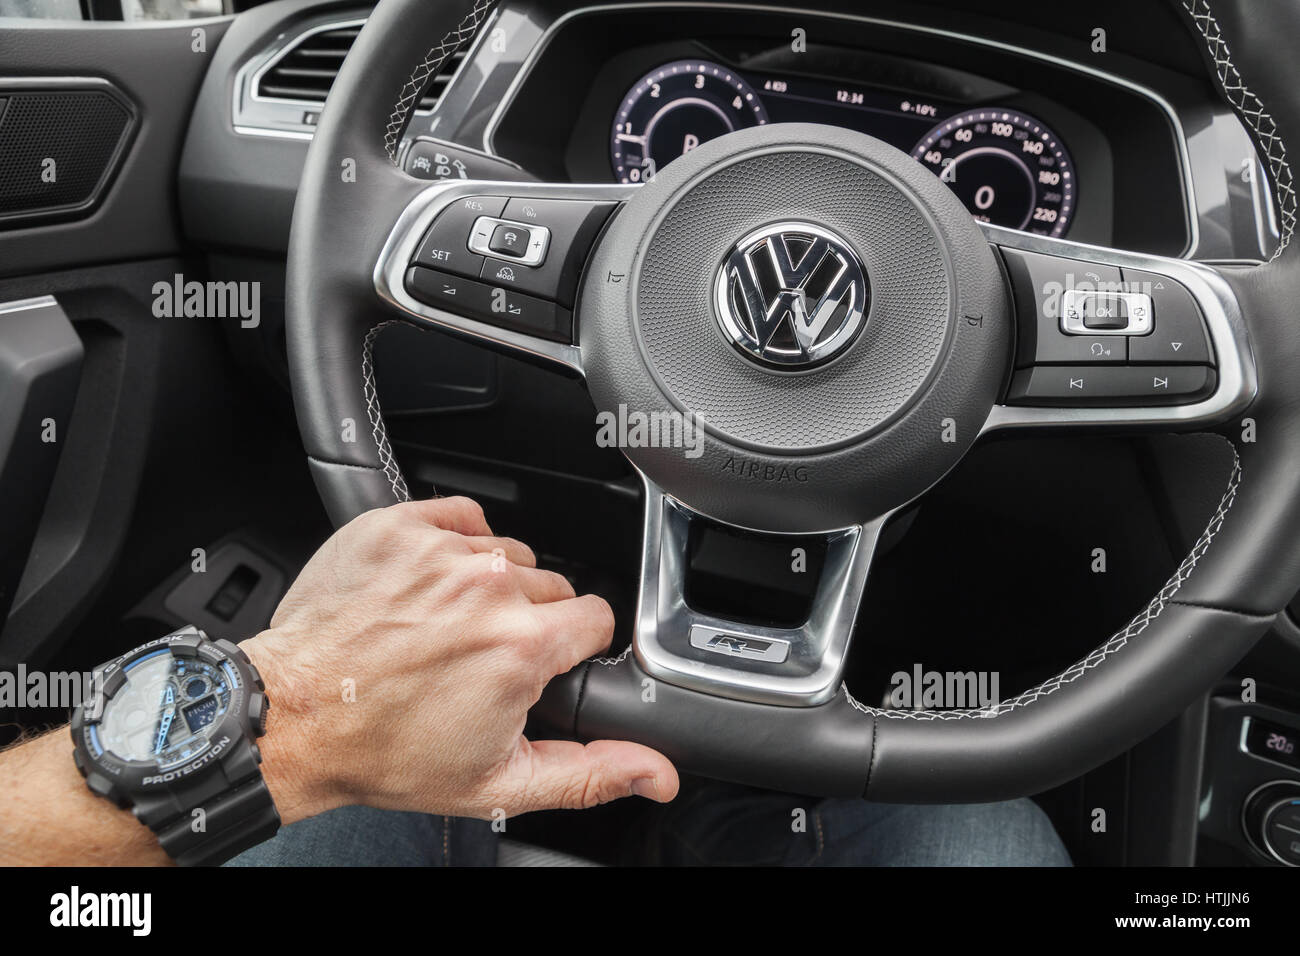 Hamburg, Germany - February 10, 2017: Volkswagen Tiguan, 4x4 R-Line. Black  compact luxury crossover vehicle interior. Driver hand with wrist watch on  Stock Photo - Alamy